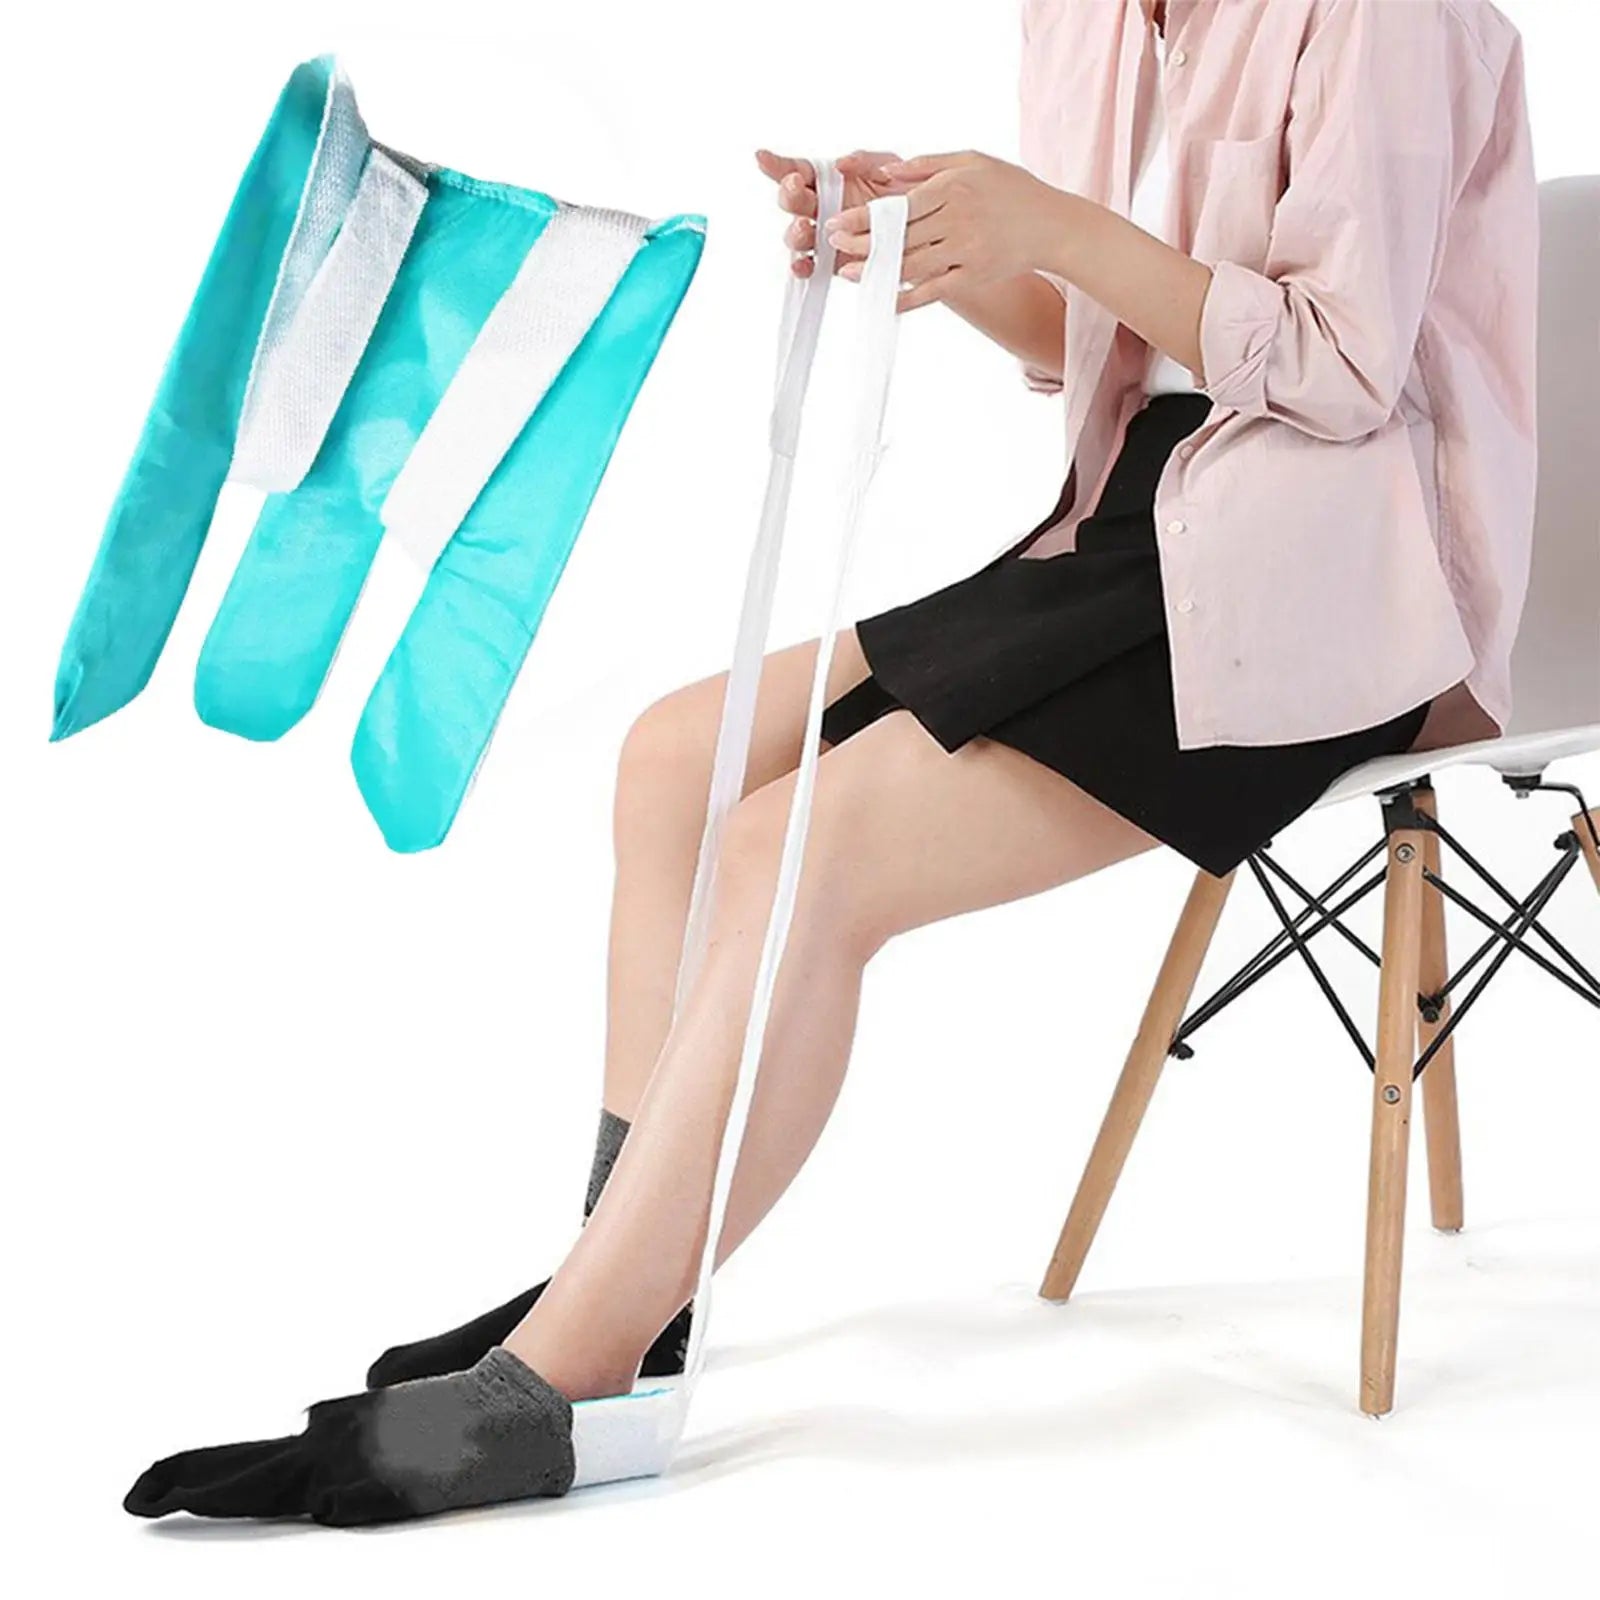 Non-Slip Sock Aid - Easy Socks Helper for Injury and Disability